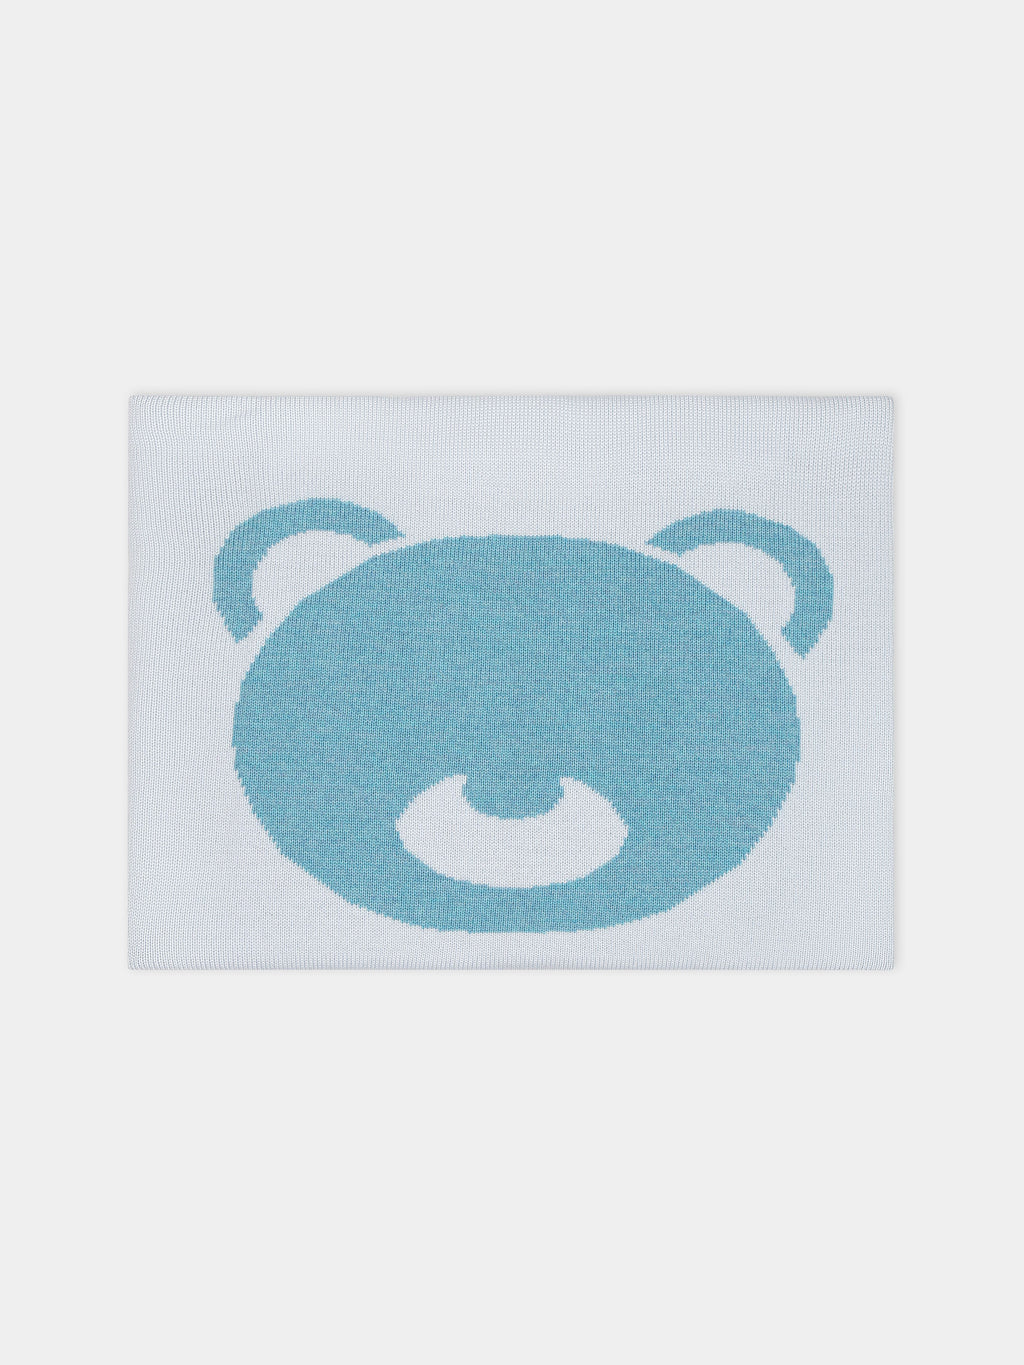 Light blue blanket for baby boy with embroidered light blue bear